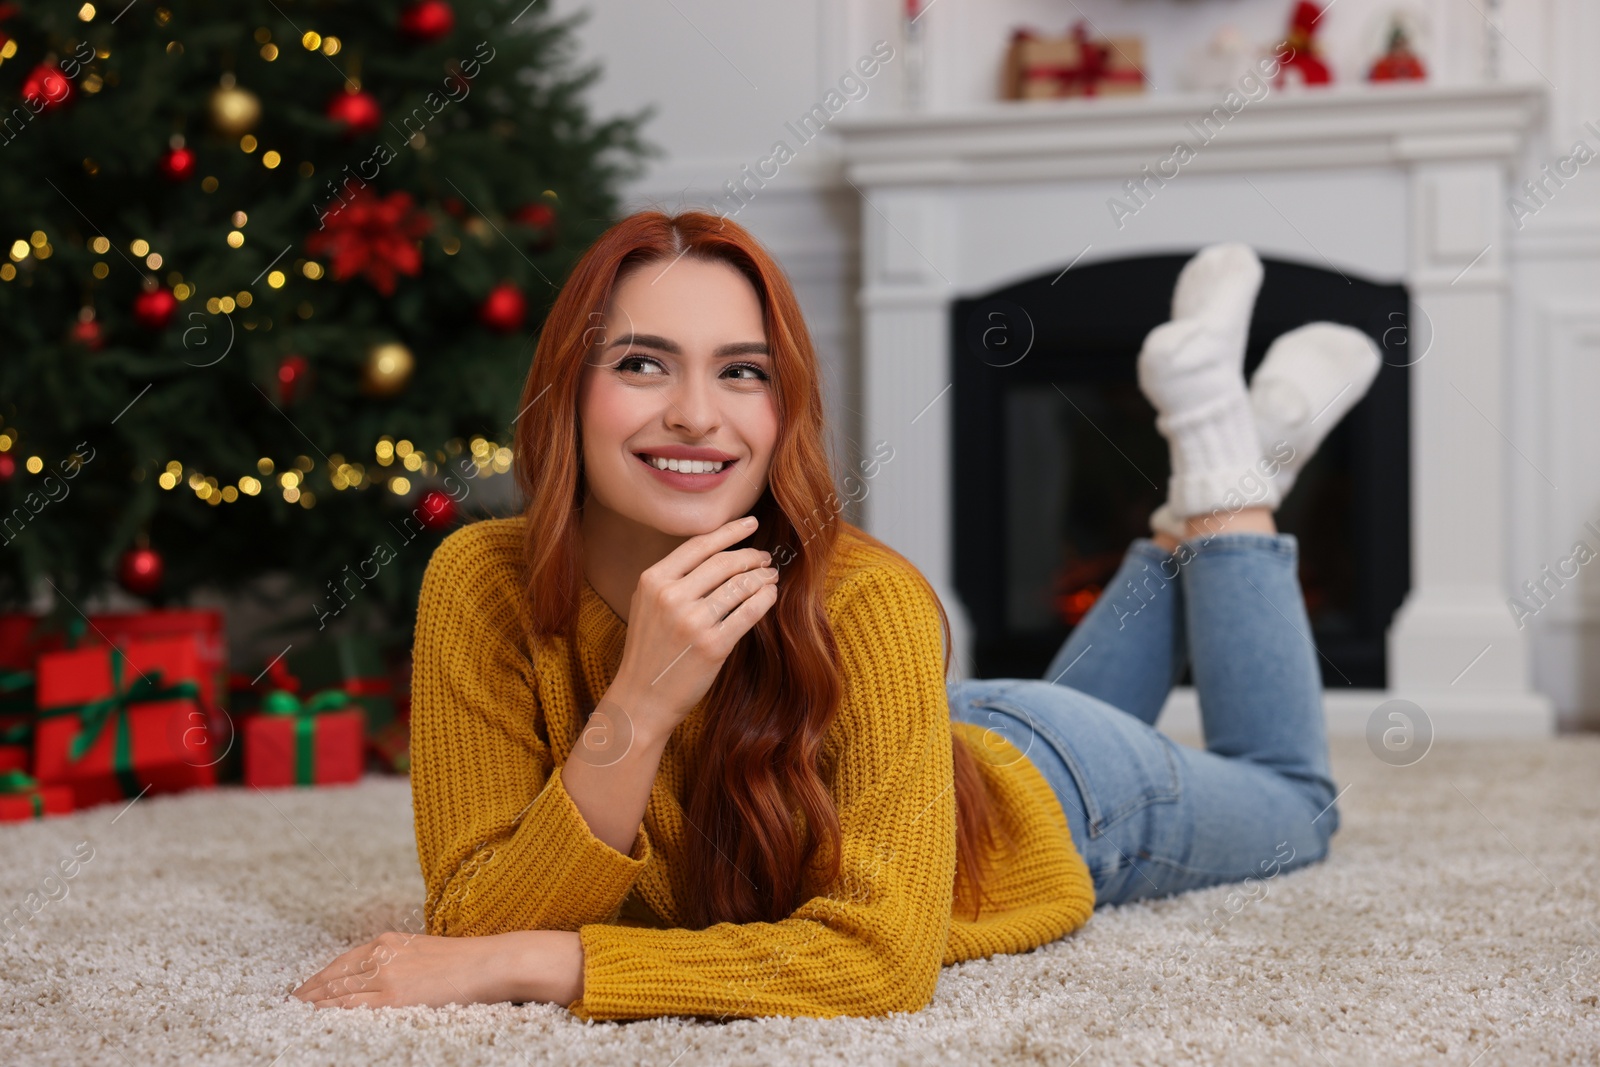 Photo of Beautiful young woman in room decorated for Christmas